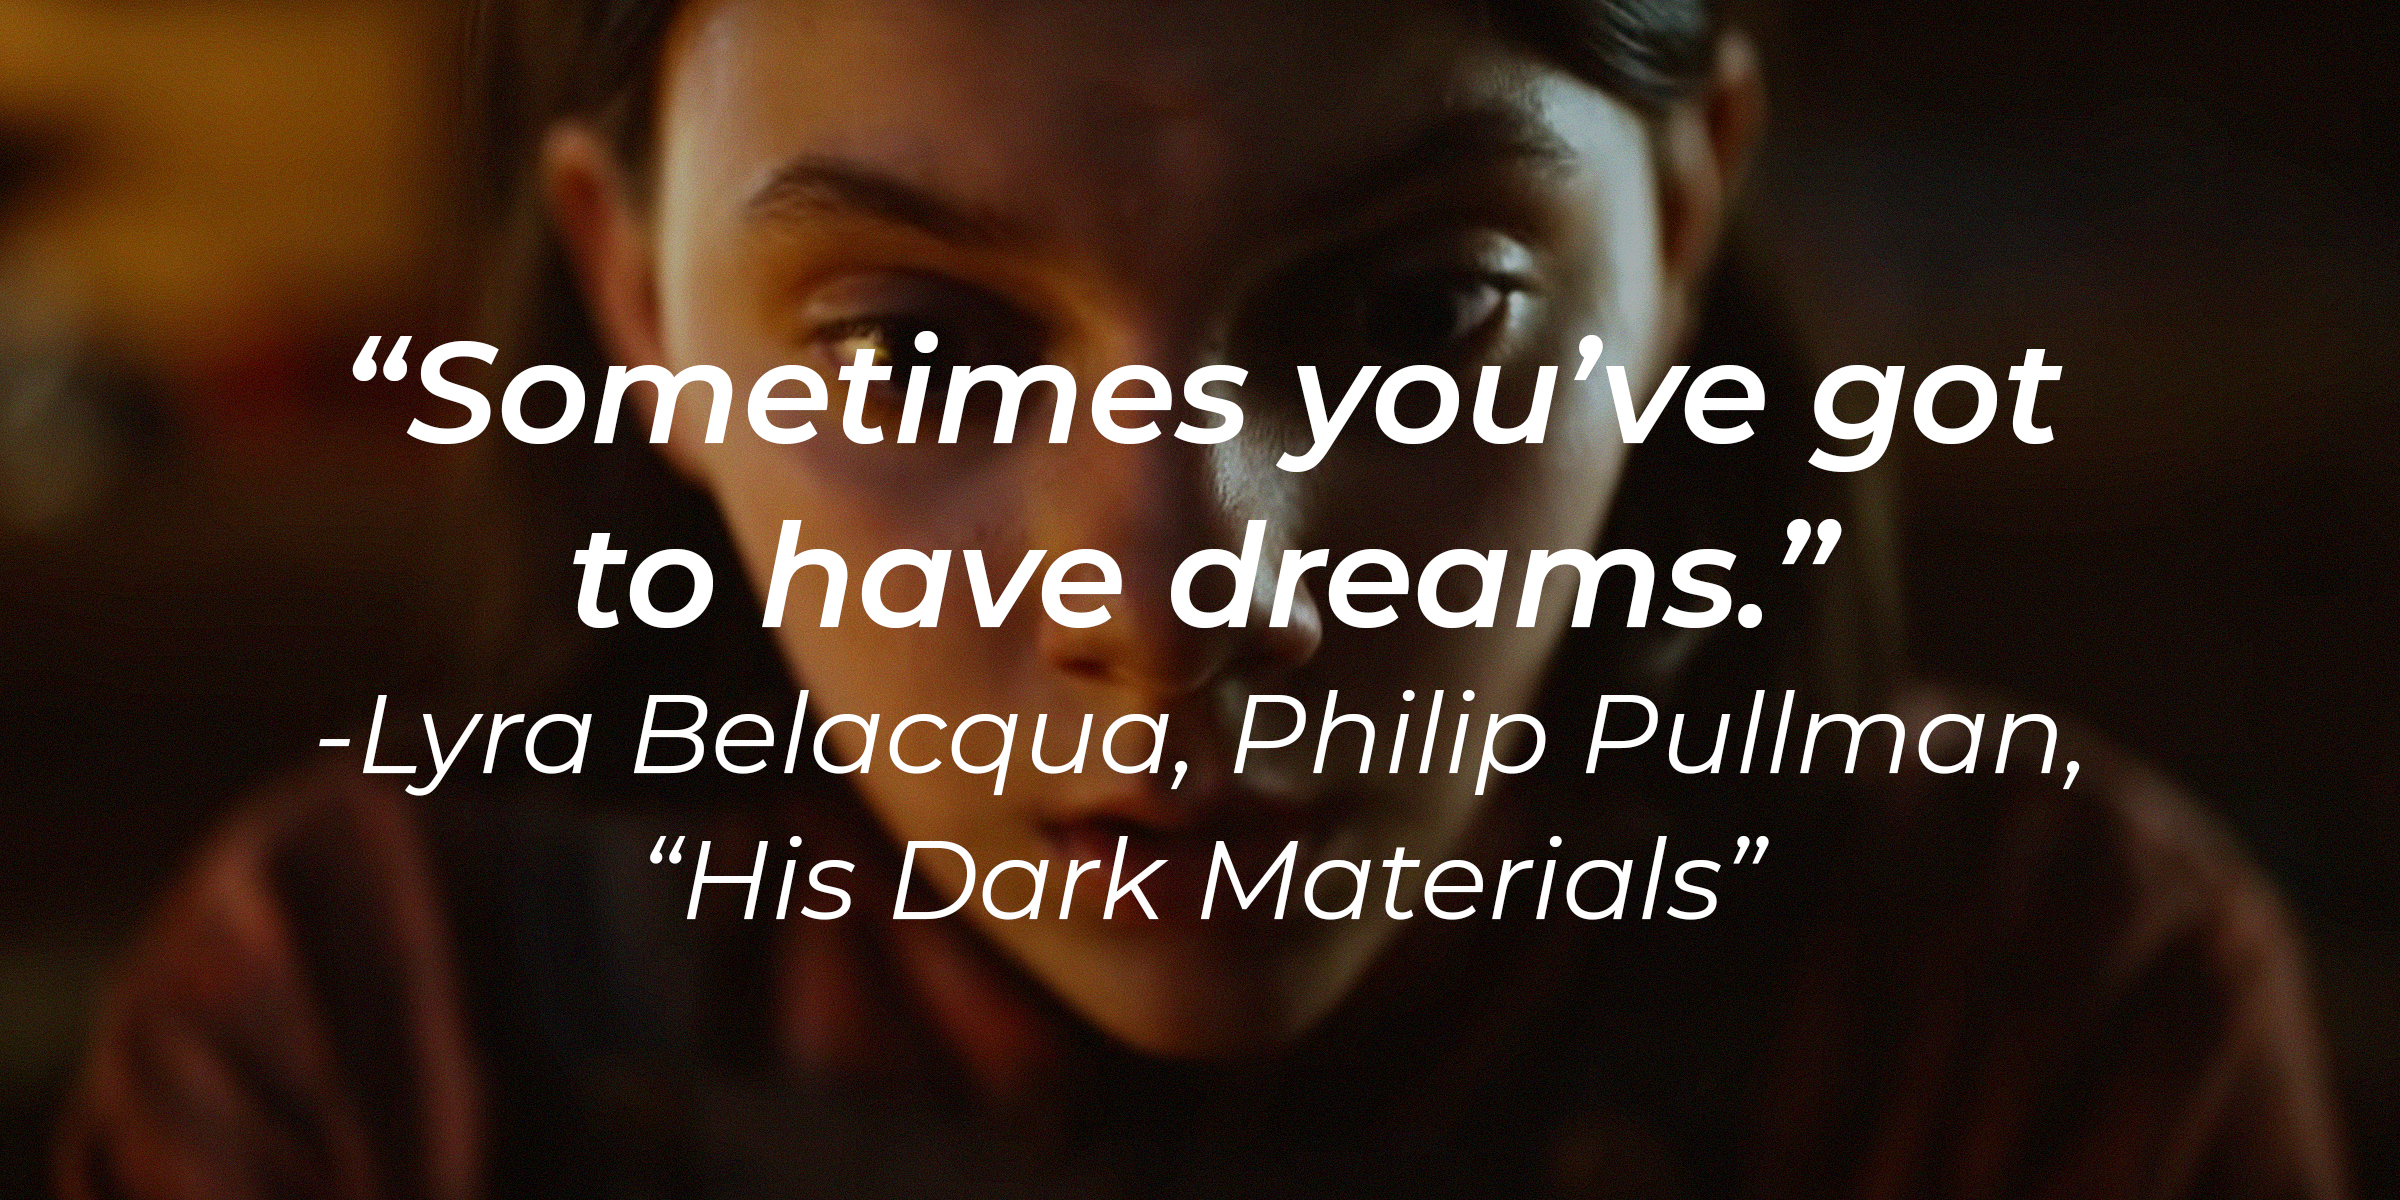 Lyra Belacqua’s quote from Philip Pullman’s "His Dark Materials" : “Sometimes you’ve got to have dreams.” | Source: youtube.com/HBO